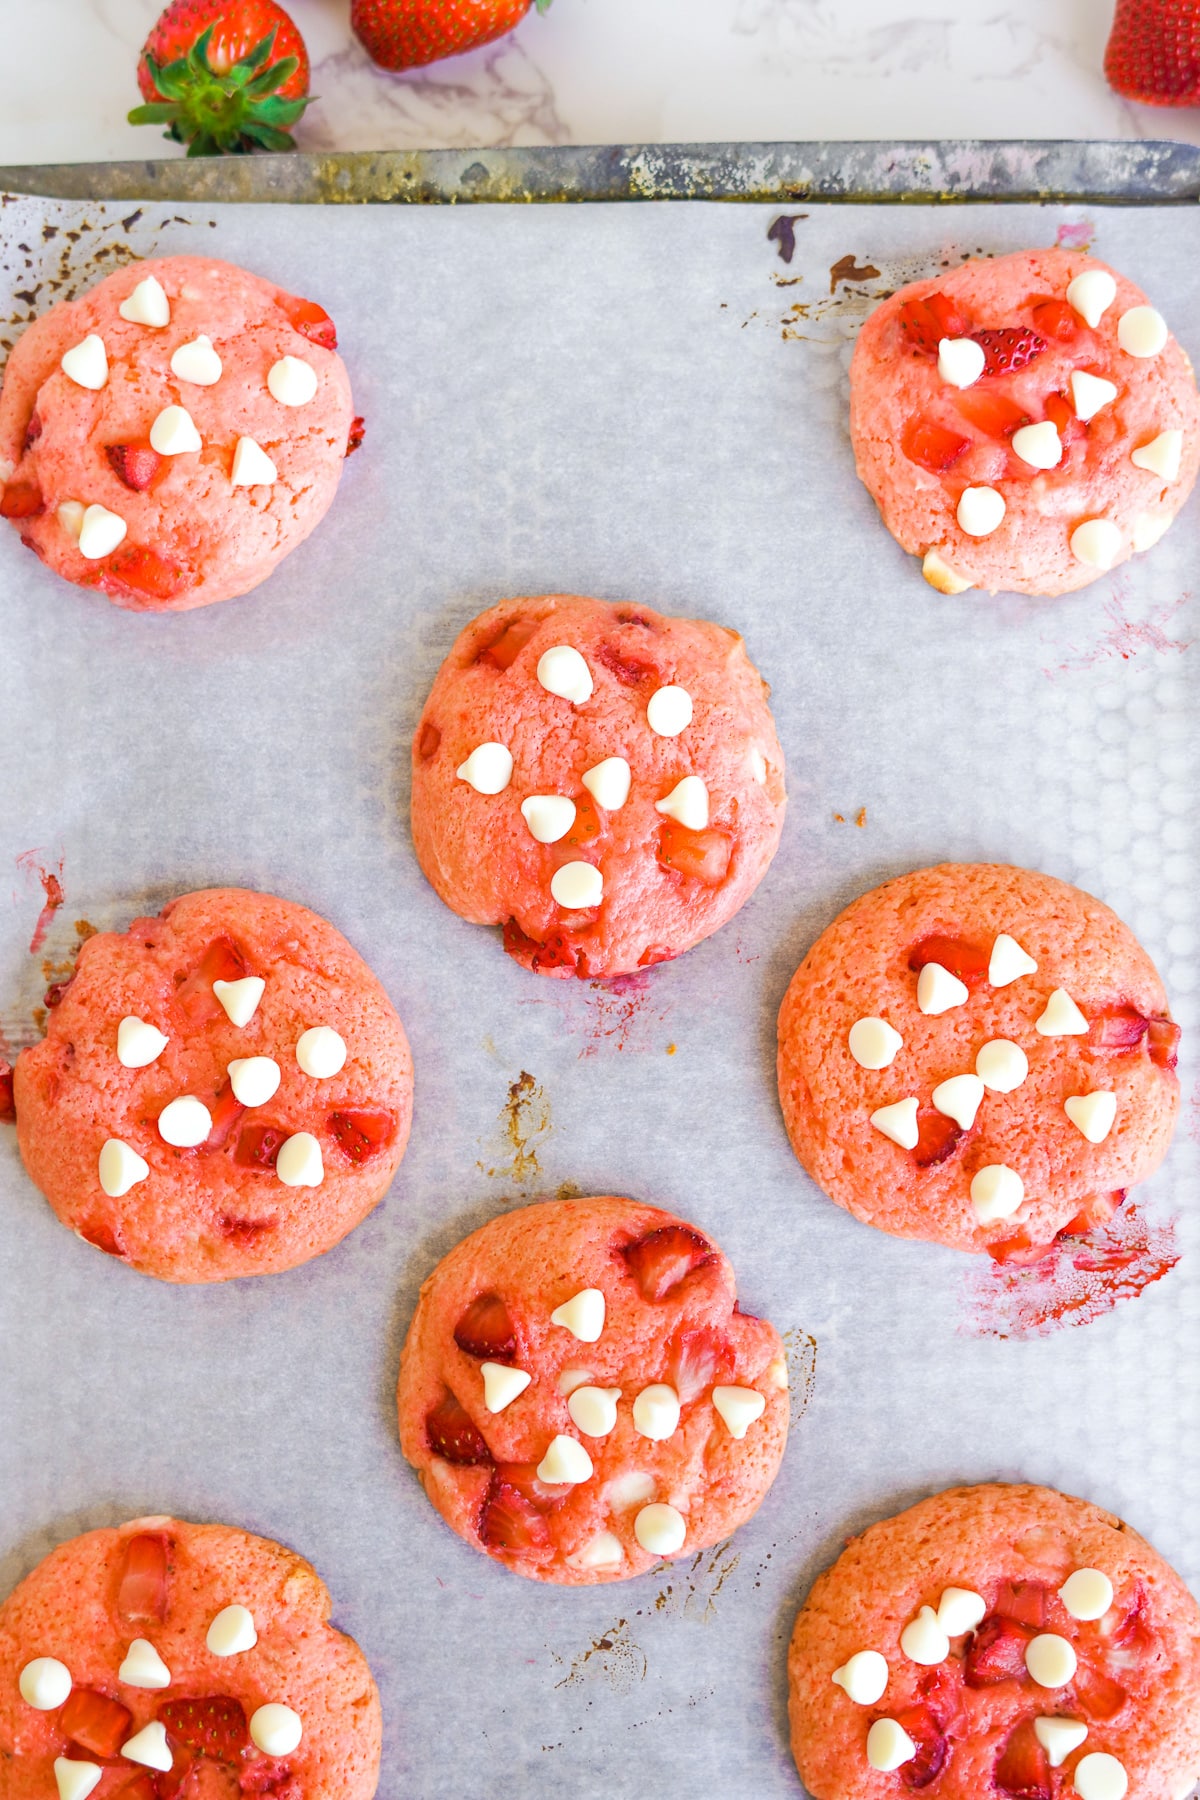 Strawberry cookies cooling on a baking sheet being topped with extra white chocolate chips and strawberries.